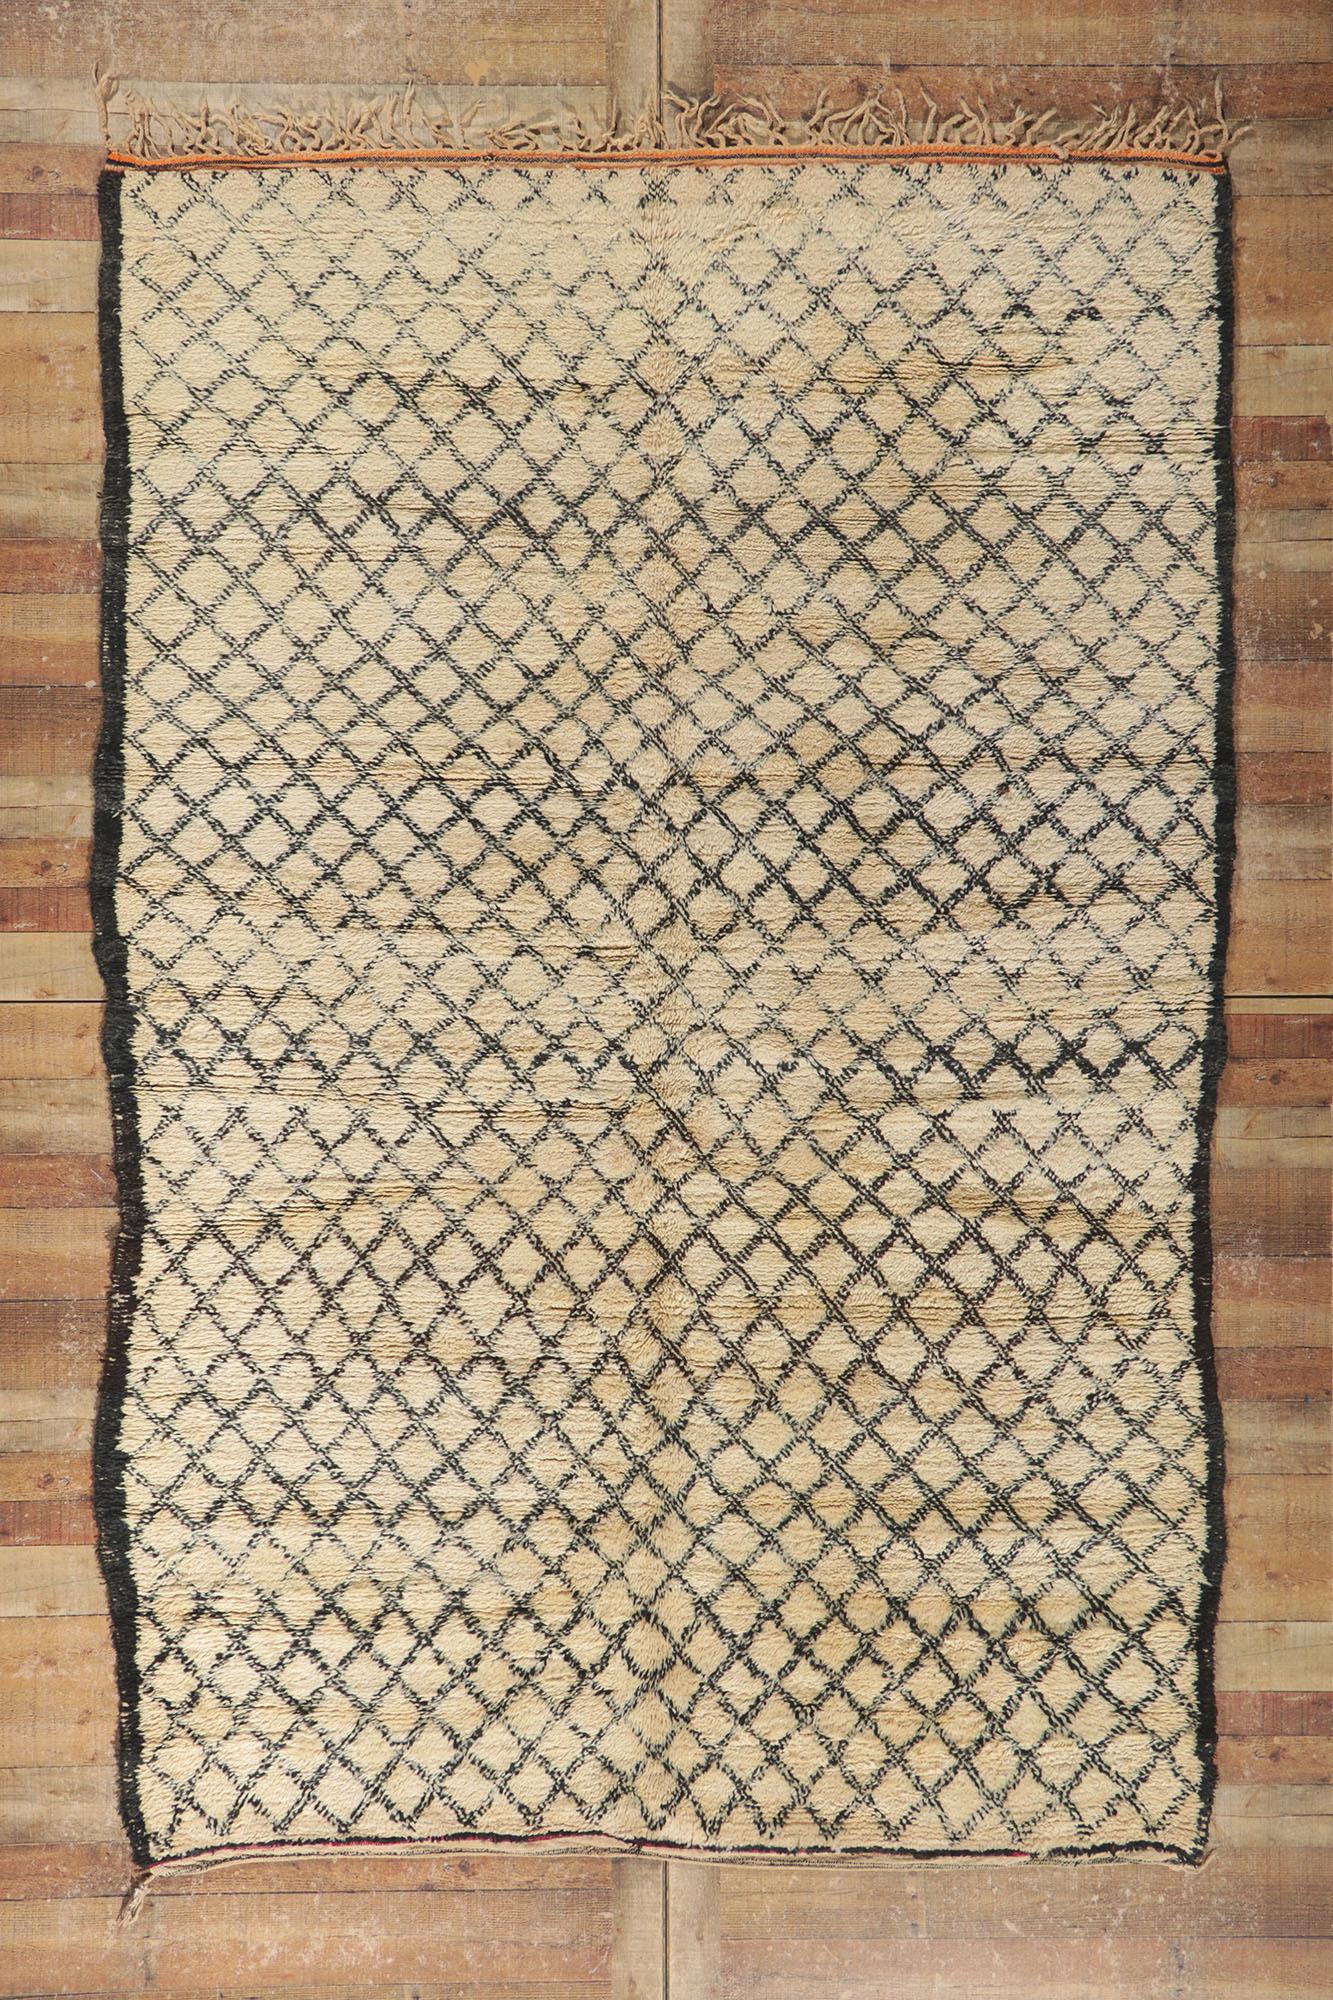 Vintage Moroccan Beni Ourain Rug, Cozy Boho Nomad Meets Midcentury Modern Style For Sale 1